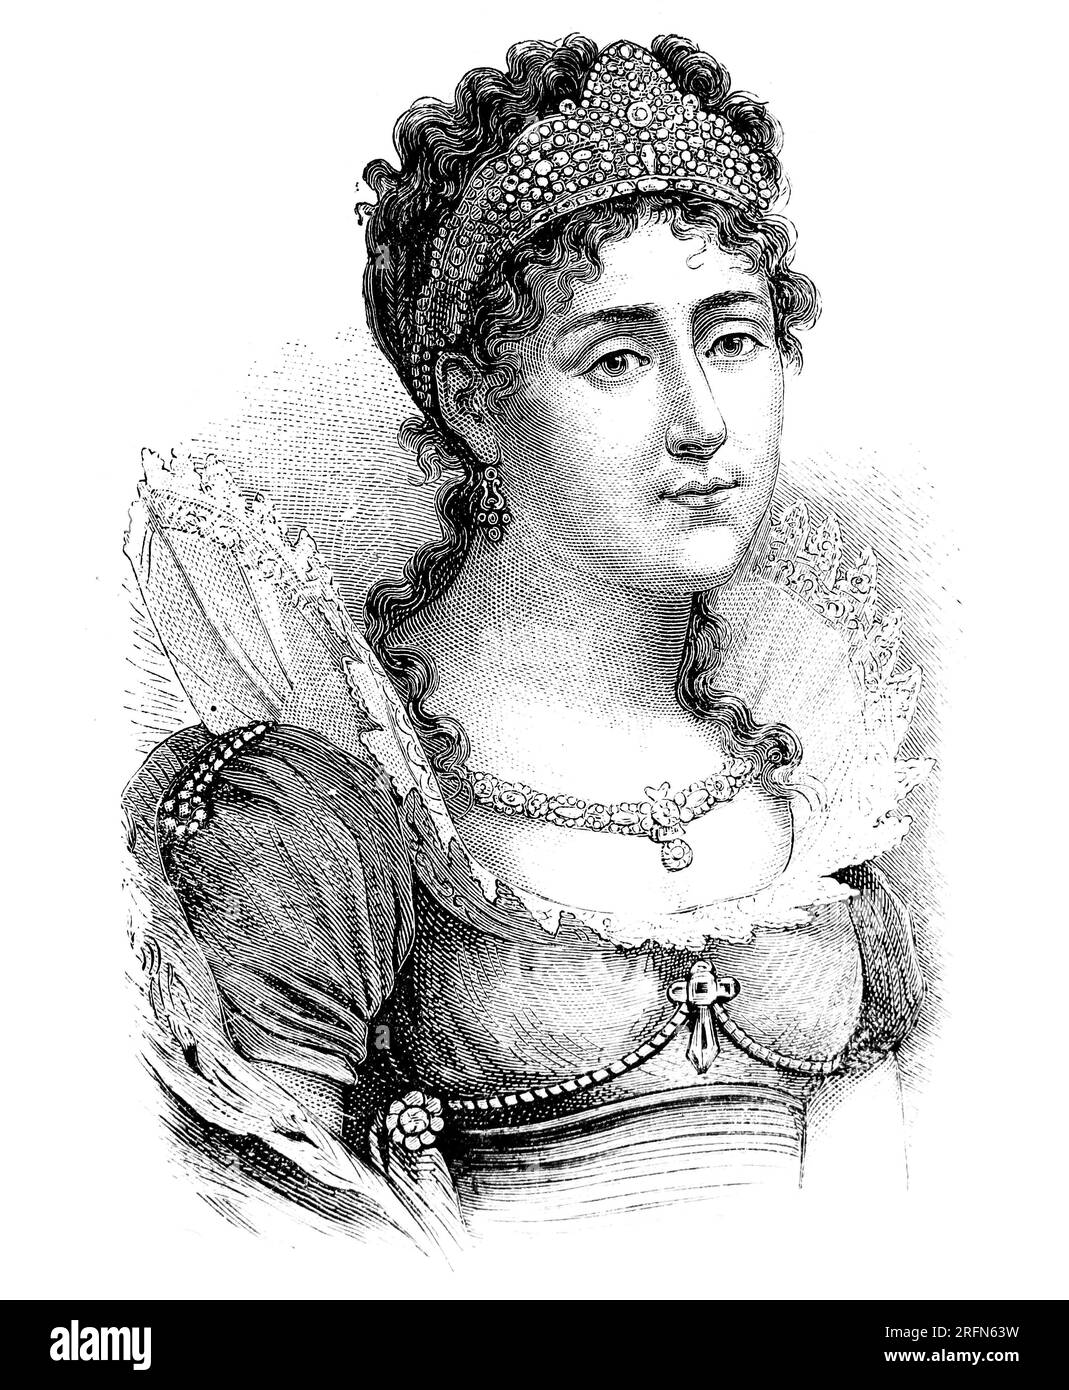 Josephine Bonaparte (1763-1814) or Josephine de Beauharnais was Empress of the French as the first wife of Emperor Napoleon I from 18 May 1804 until their marriage was annulled on 10 January 1810. Stock Photo